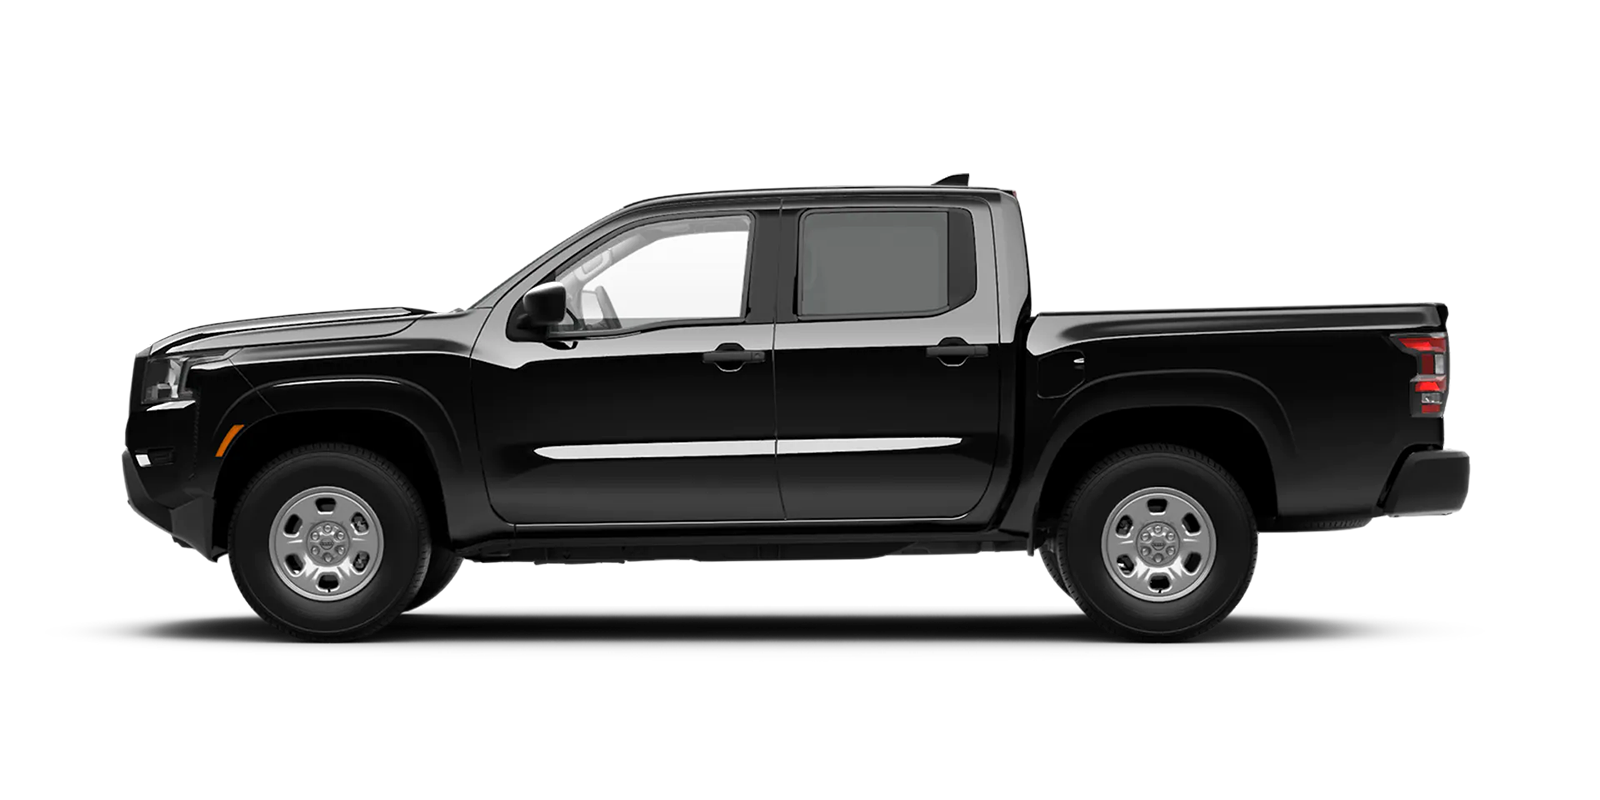 2022 Frontier Crew Cab S 4x2 in Super Black | King Windward Nissan in Kaneohe HI